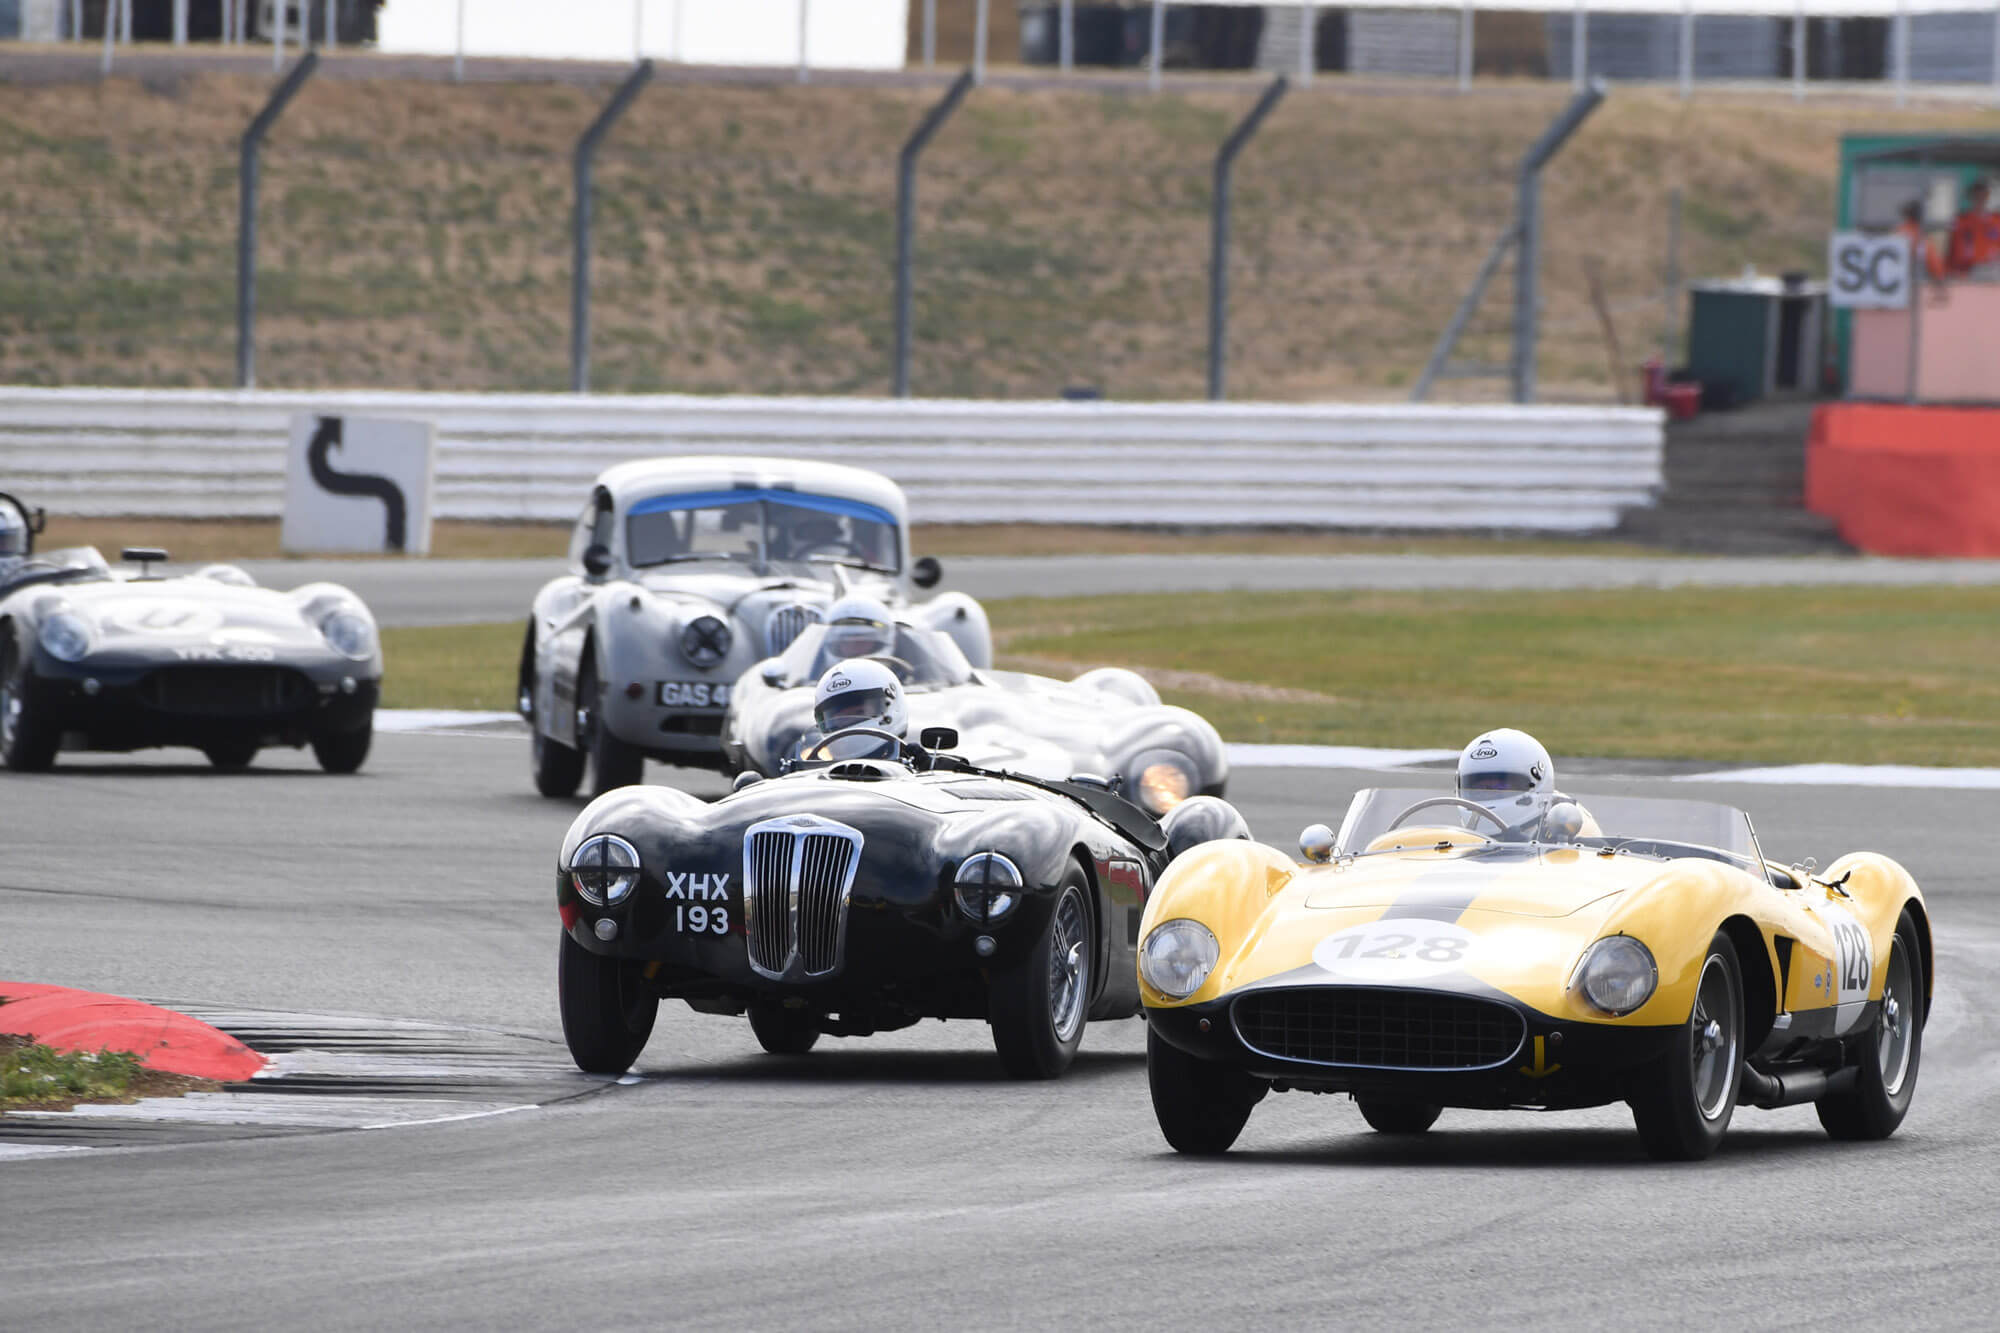 Four classic cars competing on track in the Royal Automobile Club Woodcote and Stirling Moss trophy at The Classic at Silverstone 